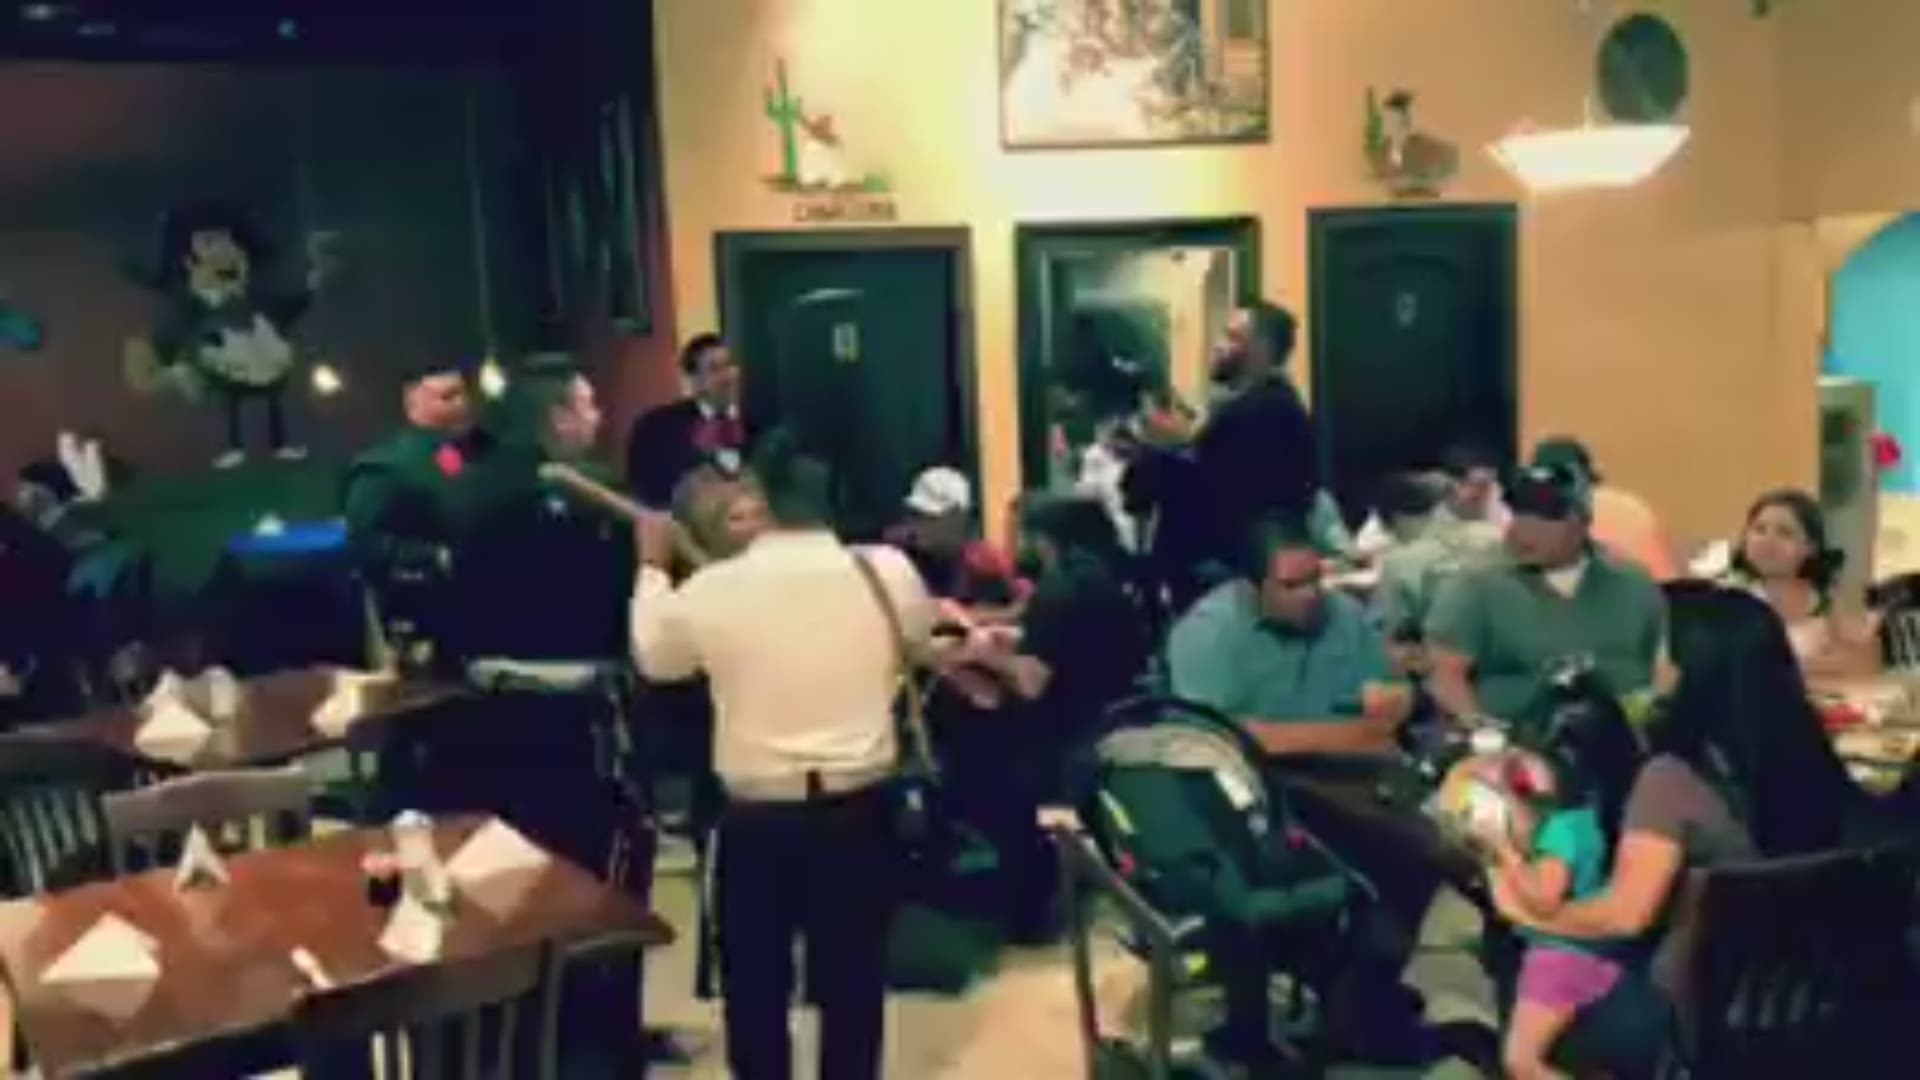 A local mariachi troupe performed the song made famous by The Temptations at El Tipico and left the restaurateurs stunned.